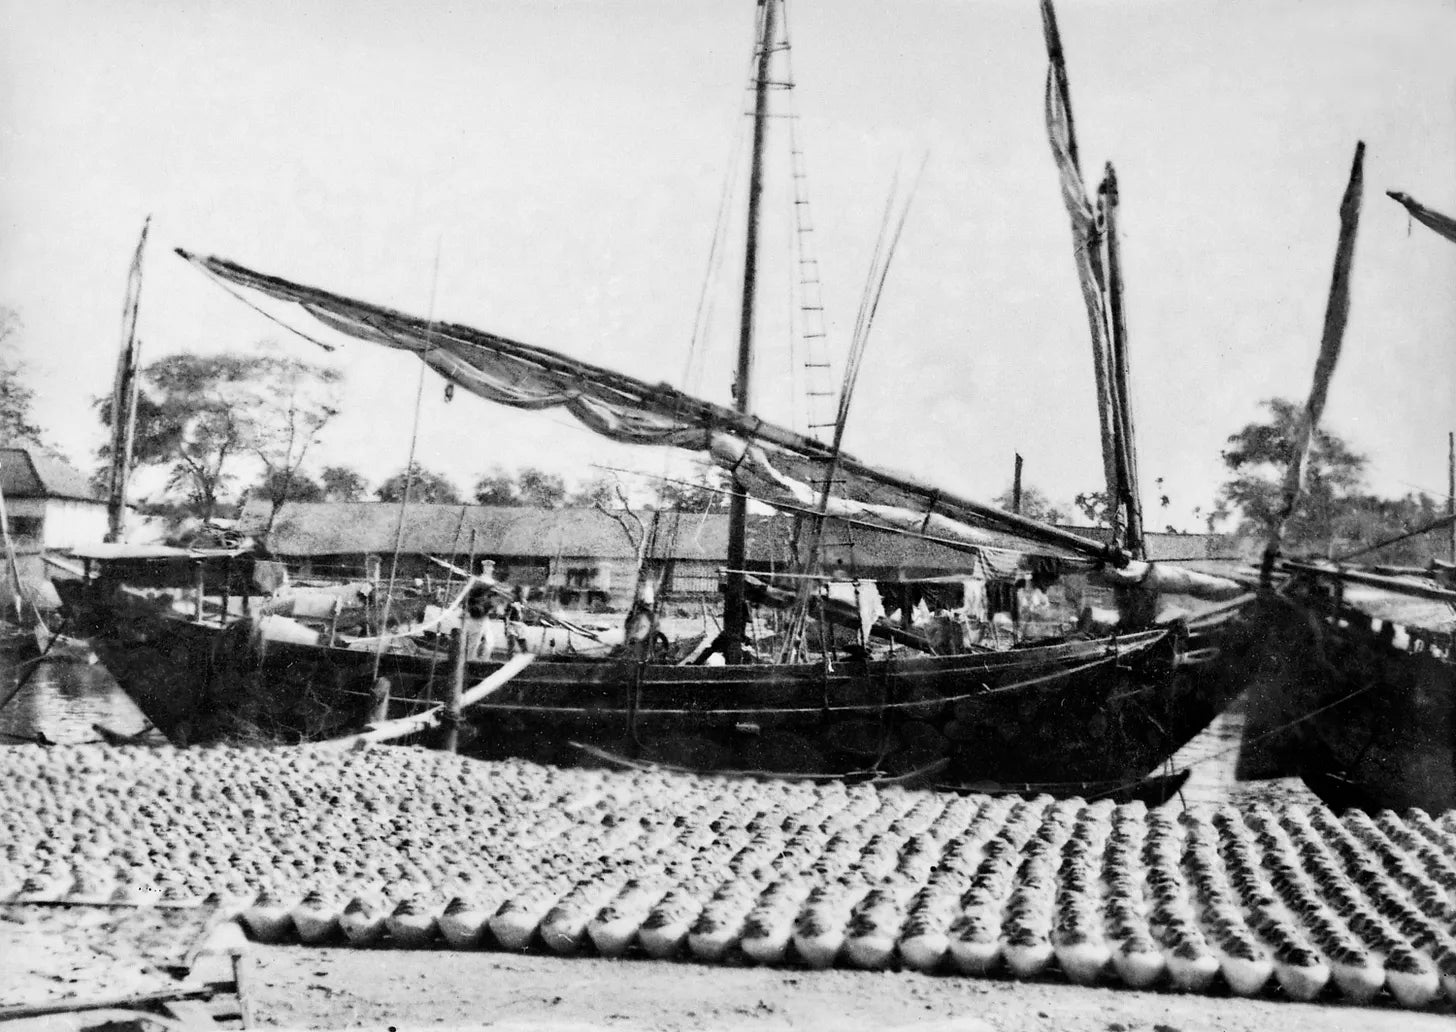 Fish sauce waiting to be loaded onto the boat. Phan Thiết 1920s. Unknown photographer.